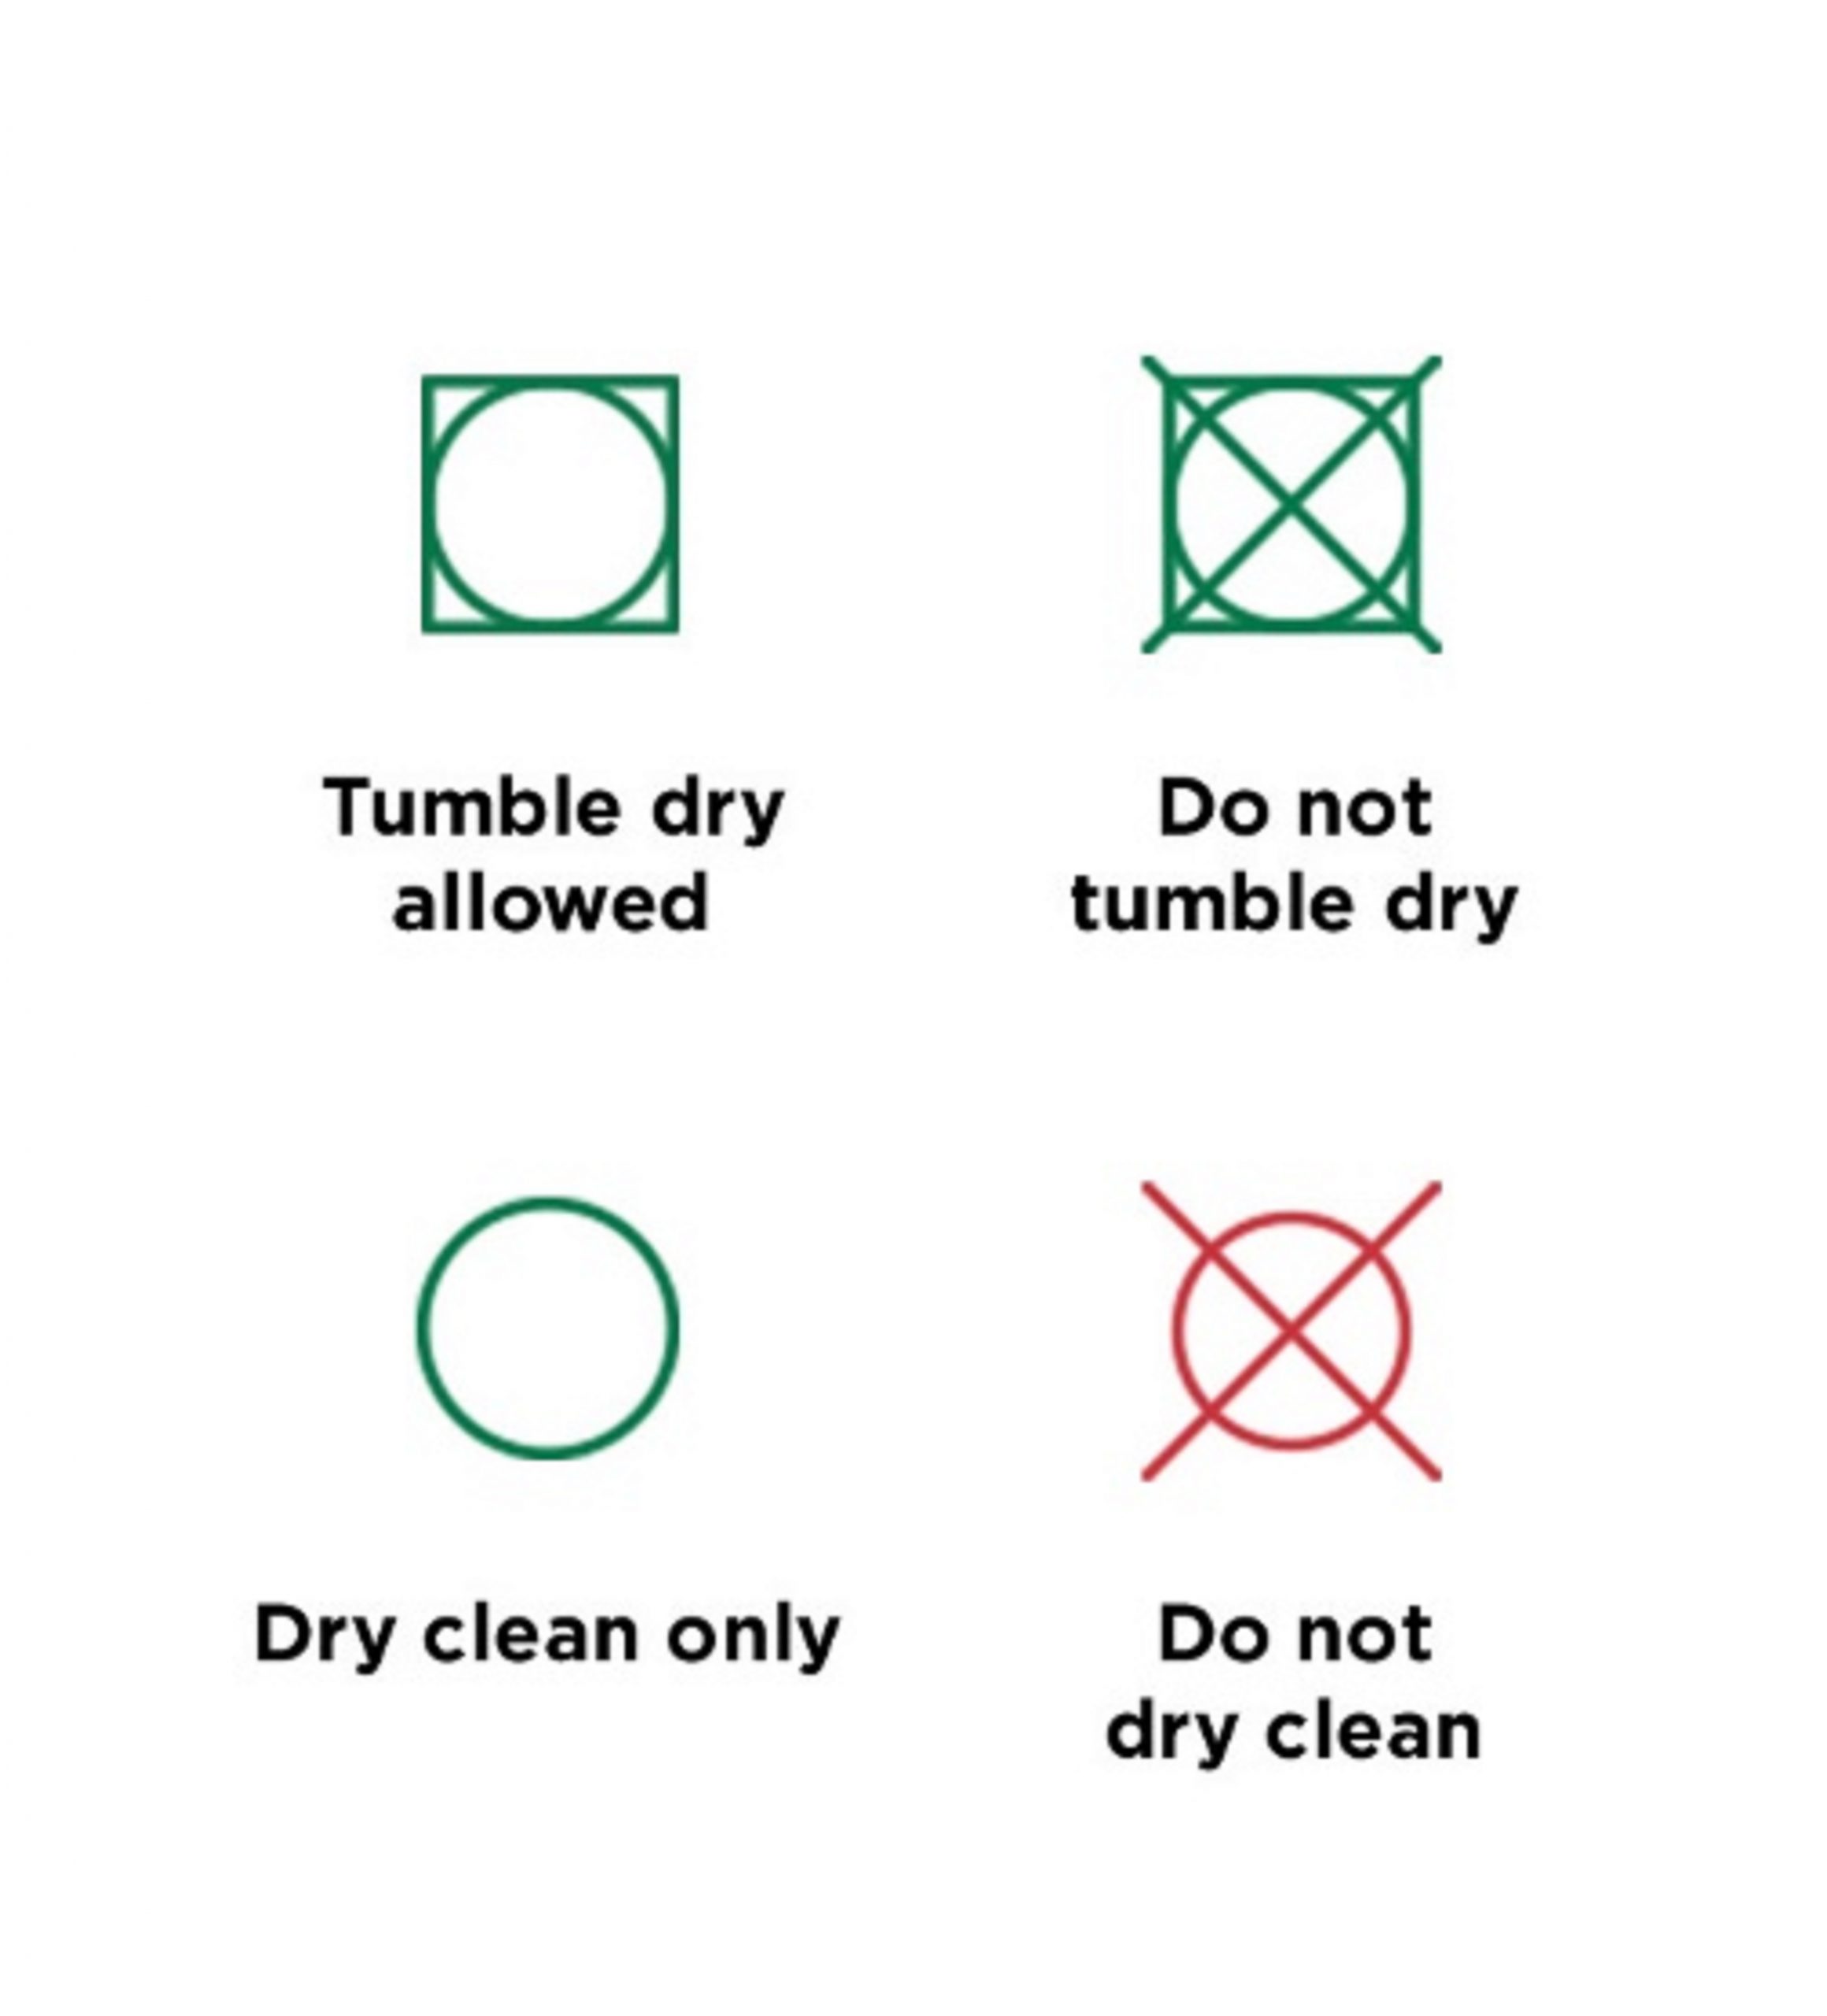 How to check your Care label Symbols?